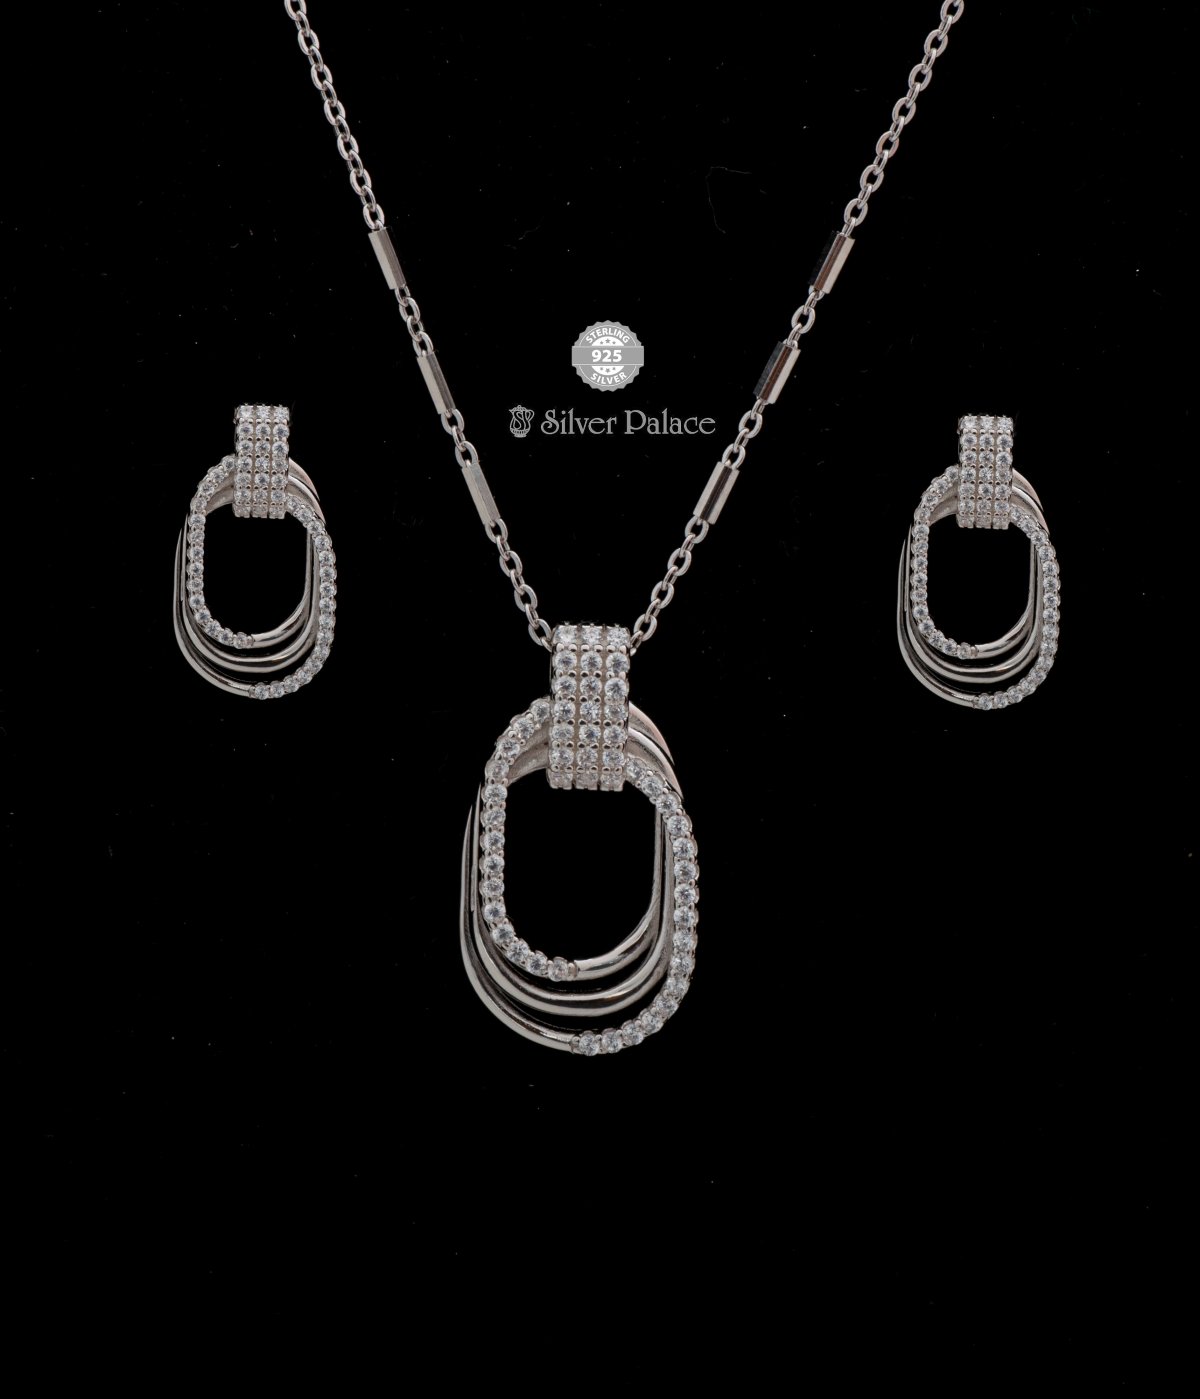  925 Sterling silver Triple Layer Oval White Zircon Fashion Pendant chain with earrings 